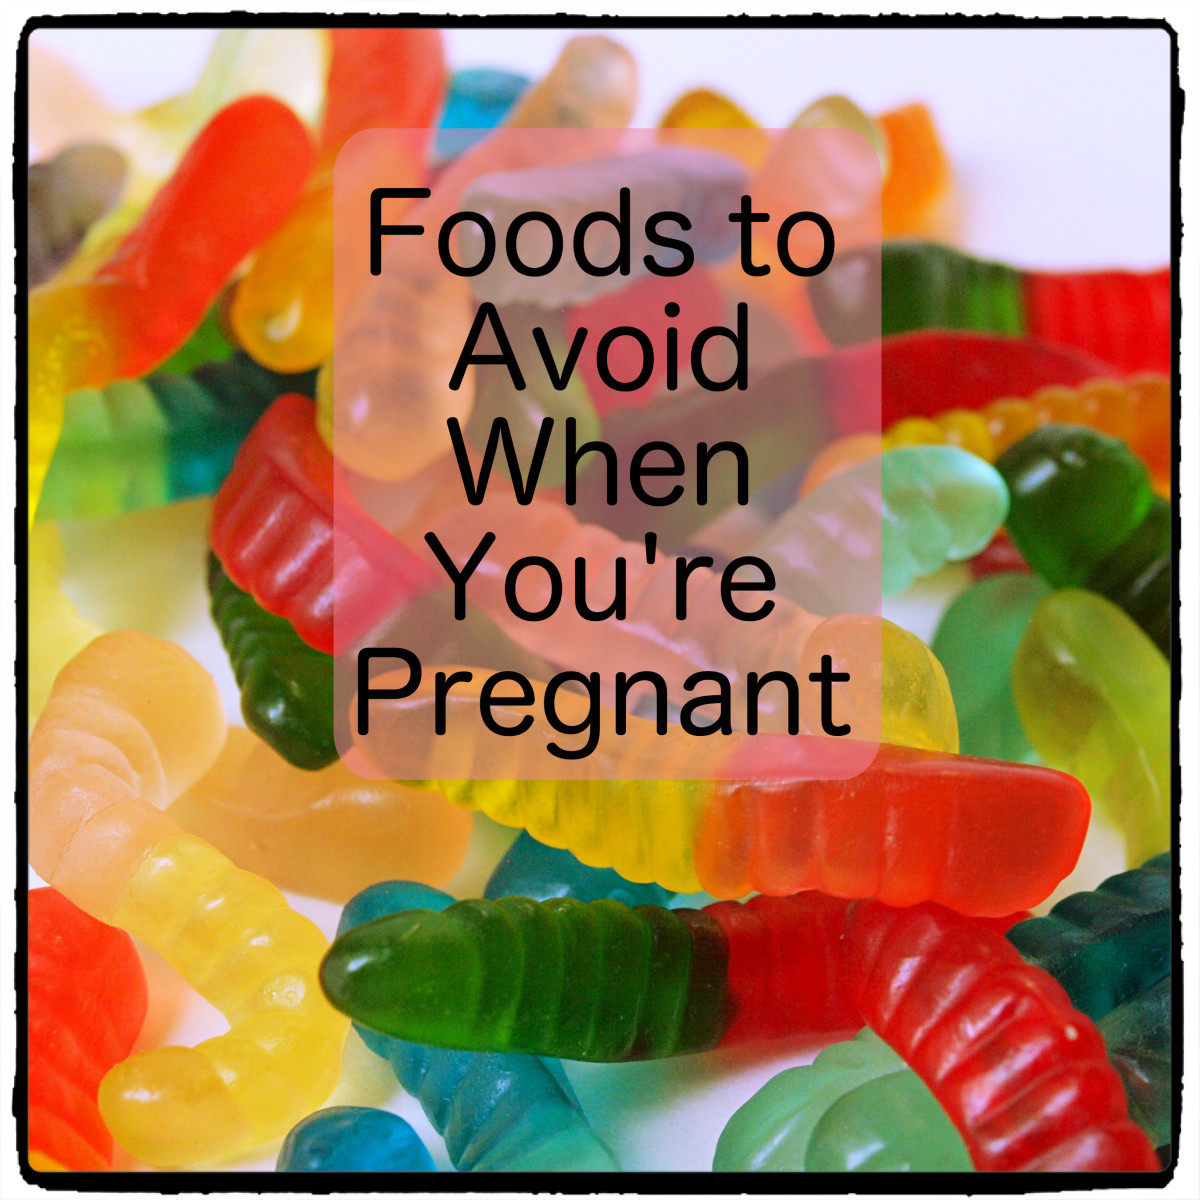 What Foods Should I Avoid While Pregnant?